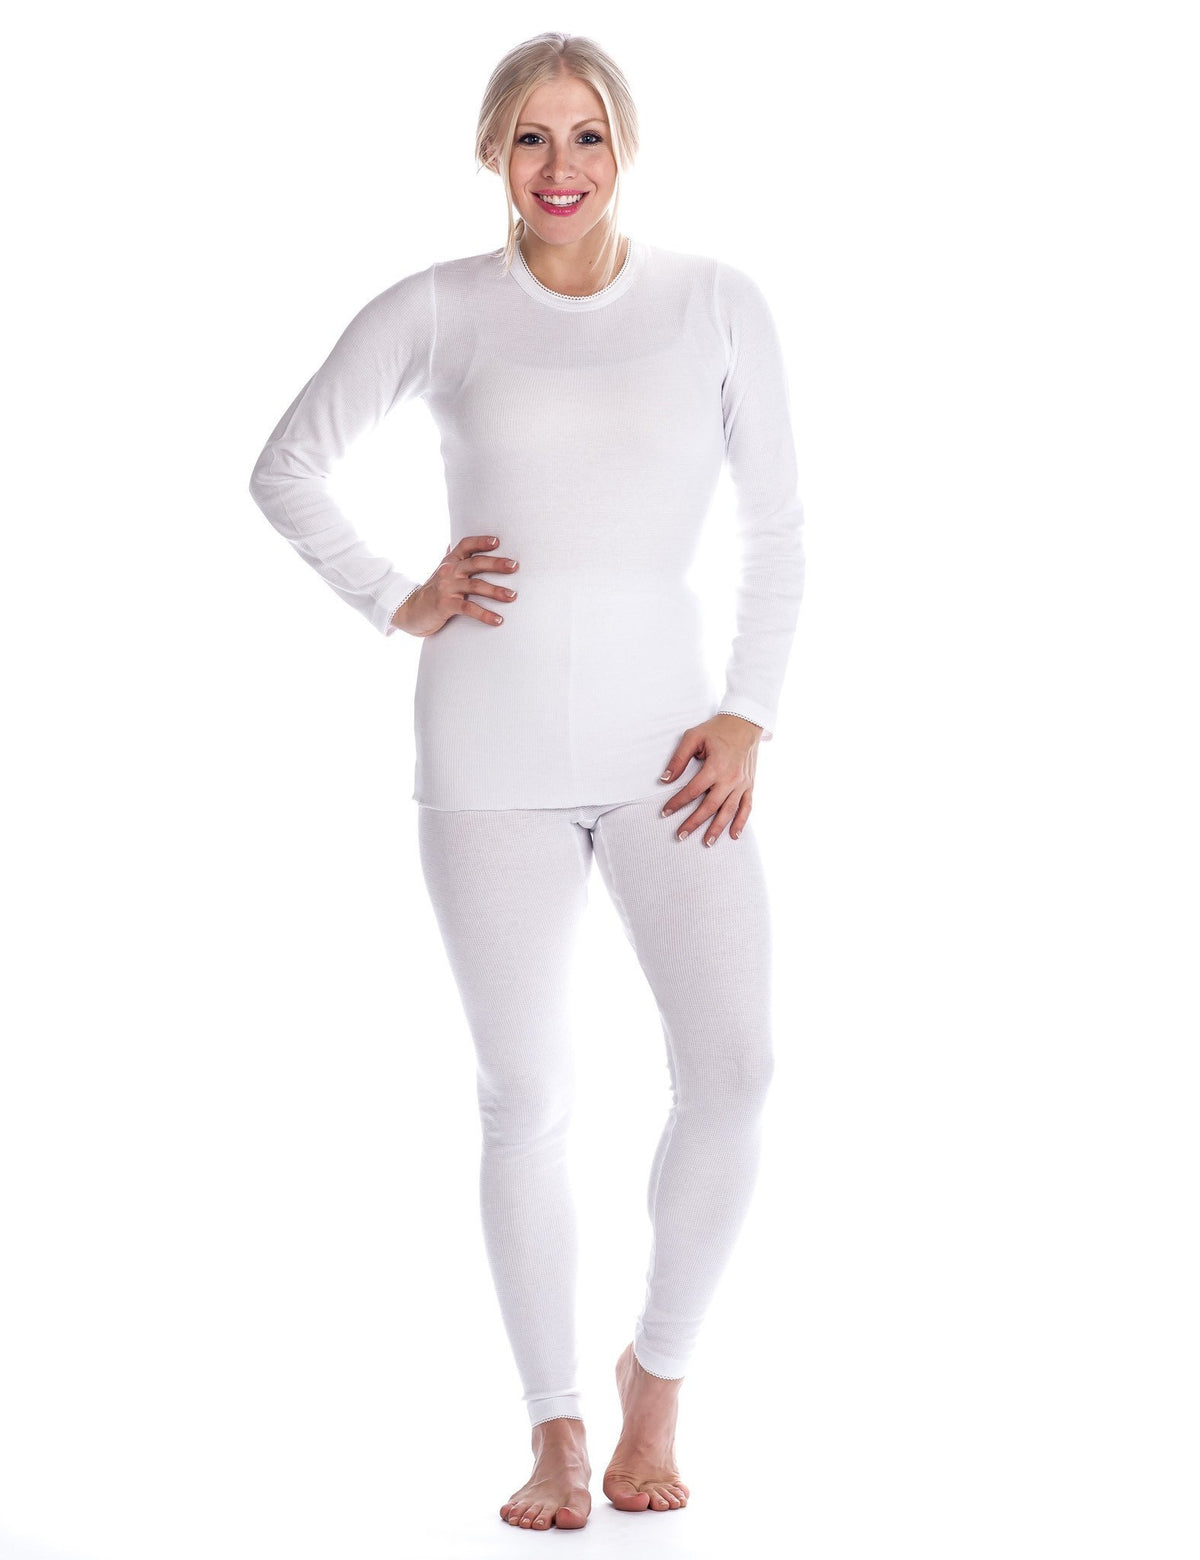 Women's Extreme Cold Waffle Knit Thermal Top and Bottom Set - White